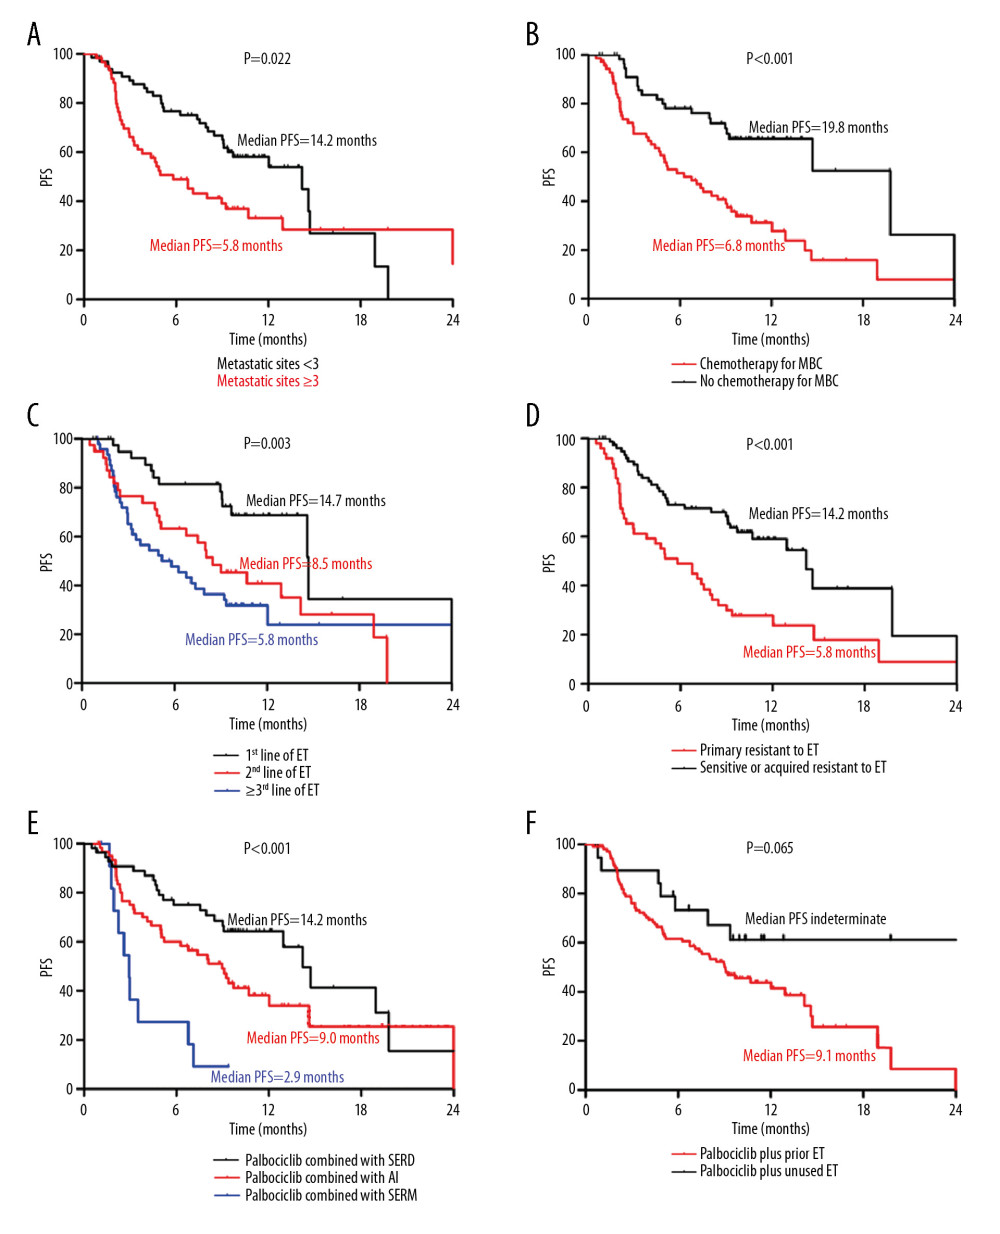 Progression-free survival of palbociclib plus endocrine therapy stratified by patient characteristics. (A) Number of metastatic sites; (B) Whether or not receiving chemotherapy for MBC; (C) Line of palbociclib in ET; (D) response to the most recent ET; (E) Type of combined ET; (F) Palbociclib combined with prior ET or unused ET. Survival curves of PFS were plotted by the Kaplan-Meier method and compared by the log-rank test. P-values of less than 0.05 indicate statistical significance. PFS – progression-free survival; ET – endocrine therapy; MBC – metastatic breast cancer; SERD – selective estrogen receptor degrader; AI – aromatase inhibitor; SERM – selective estrogen receptor modulator.